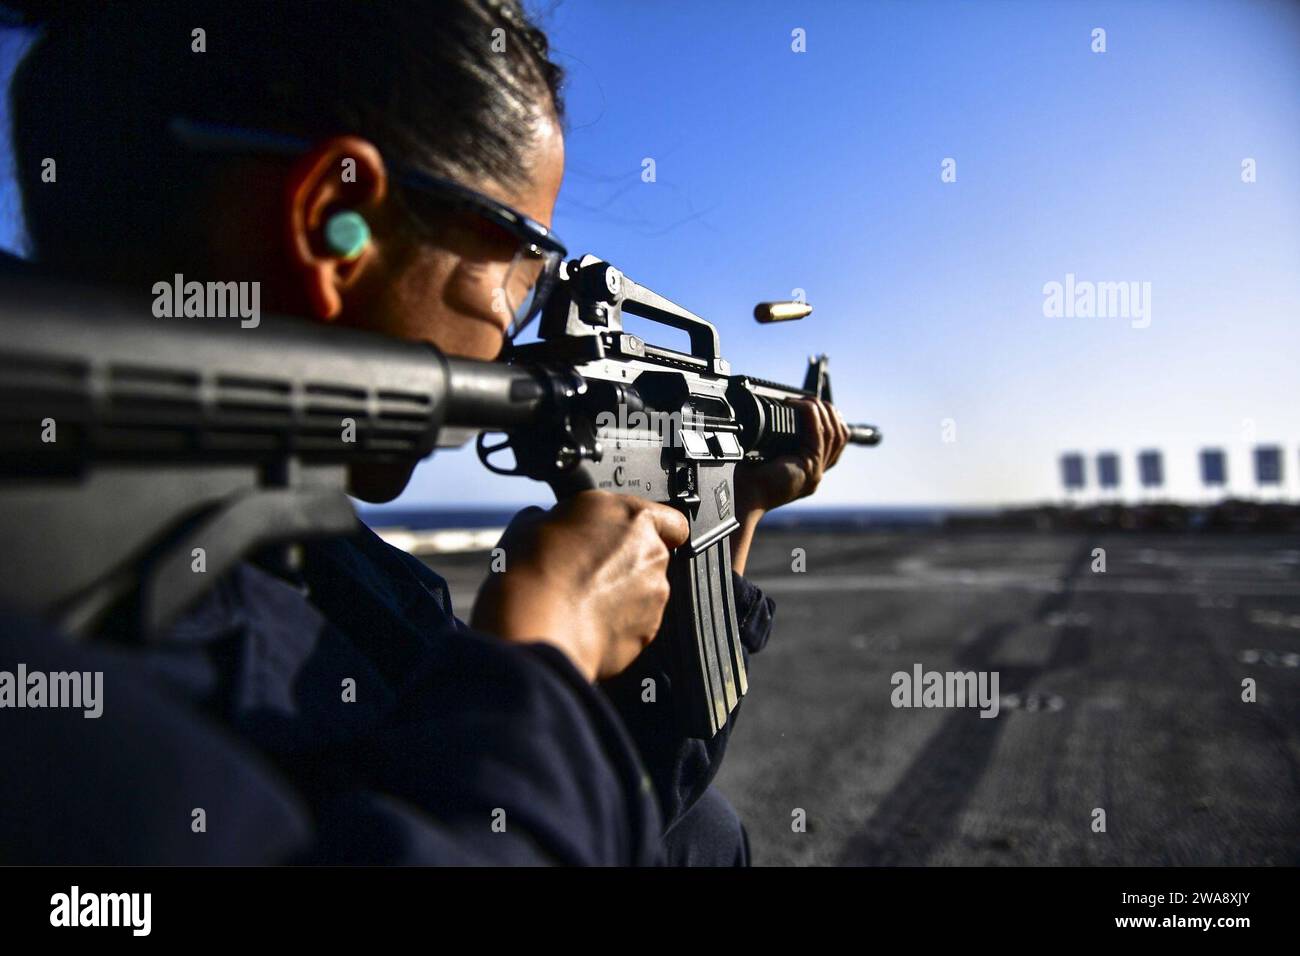 US military forces. 171108BK384-462 MEDITERRANEAN SEA (Nov. 8, 2017) Seaman Joanna Valdez, from Fontana, California, and assigned to the deck department aboard the San Antonio-class amphibious transport dock ship USS San Diego (LPD 22), fires an M4A1 Carbine during a live-fire training exercise on the ship’s flight deck Nov. 8, 2017. San Diego is deployed with the America Amphibious Ready Group and the 15th Marine Expeditionary Unit to support maritime security and theater security cooperation in efforts in the U.S. 6th Fleet area of operations. (U.S. Navy photo by Mass Communication Specialis Stock Photo